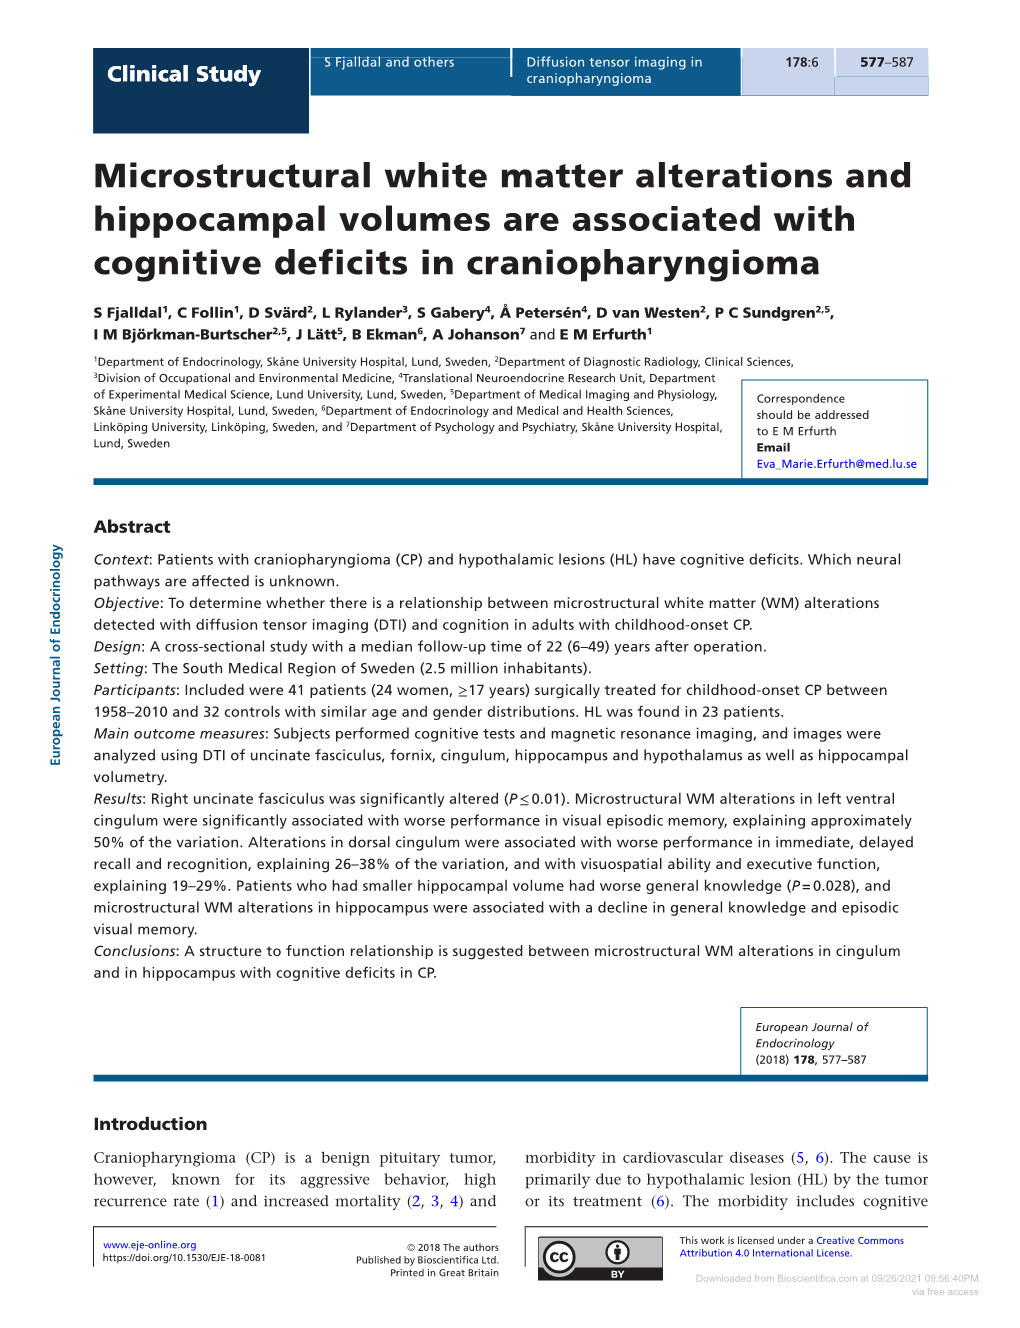 Microstructural White Matter Alterations and Hippocampal Volumes Are